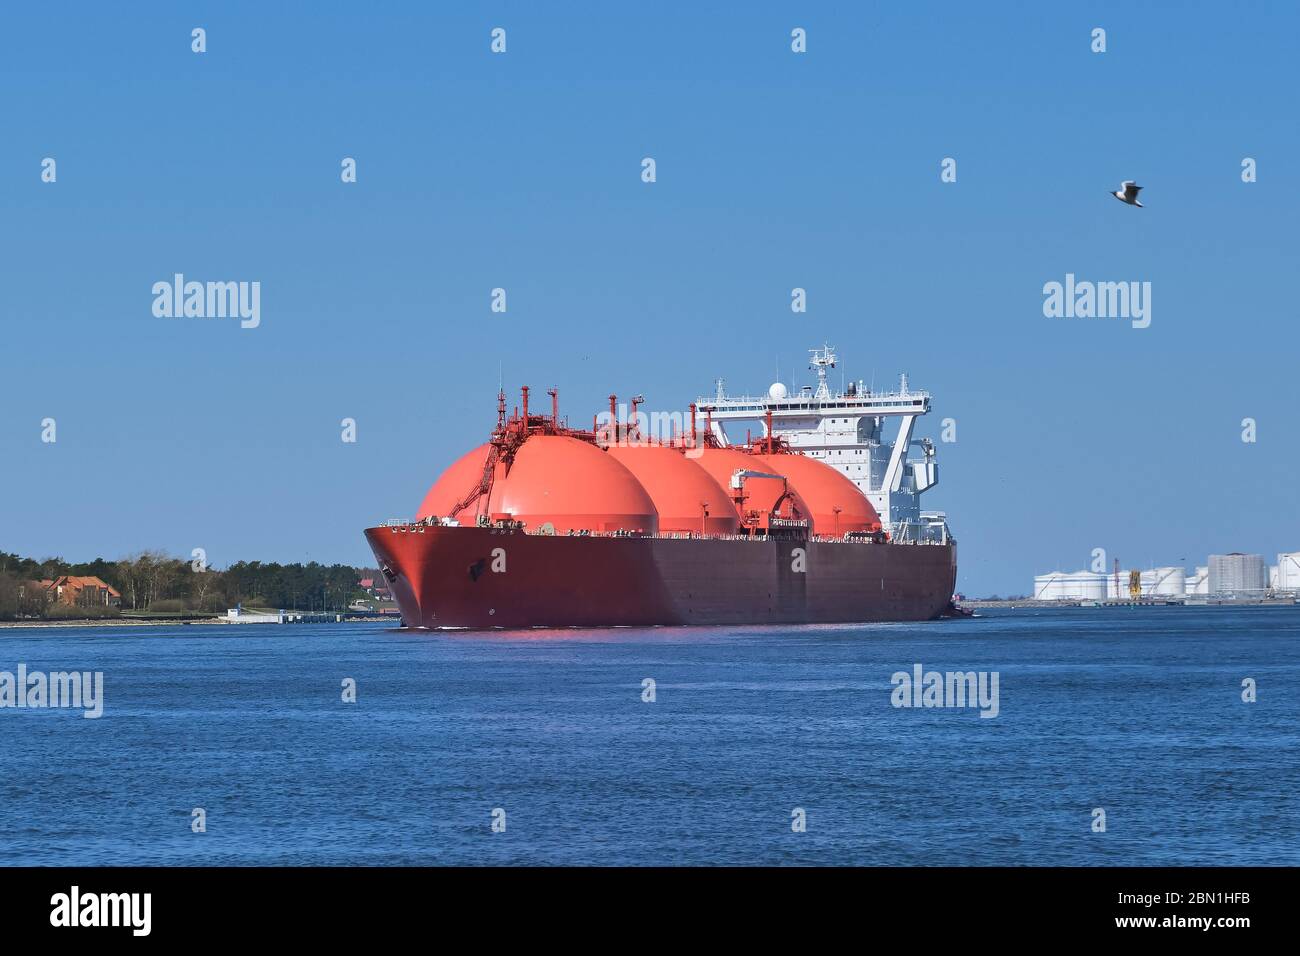 LNG or liquified natural gas tanker enter port on a sunny day in Klaipeda, Lithuania. Alternative gas supply, commercial freight, energy crisis Stock Photo